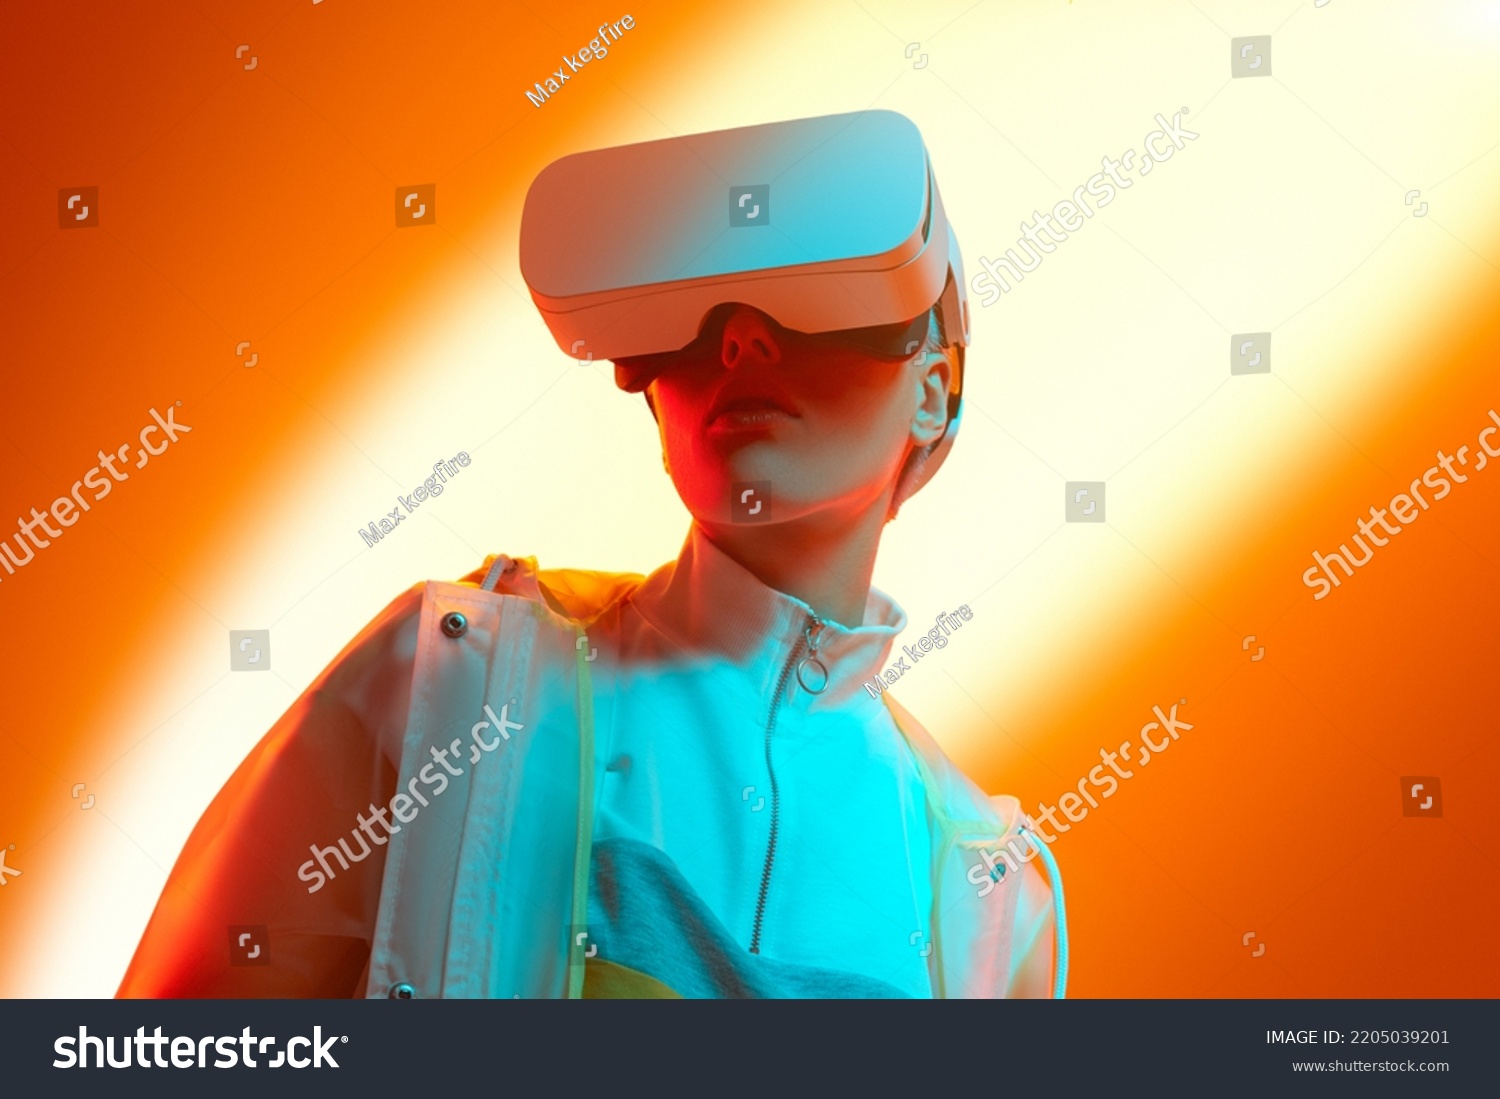 Low angle of young stylish woman in futuristic outfit and VR goggles exploring cyberspace against bright orange background in studio with neon illumination #2205039201